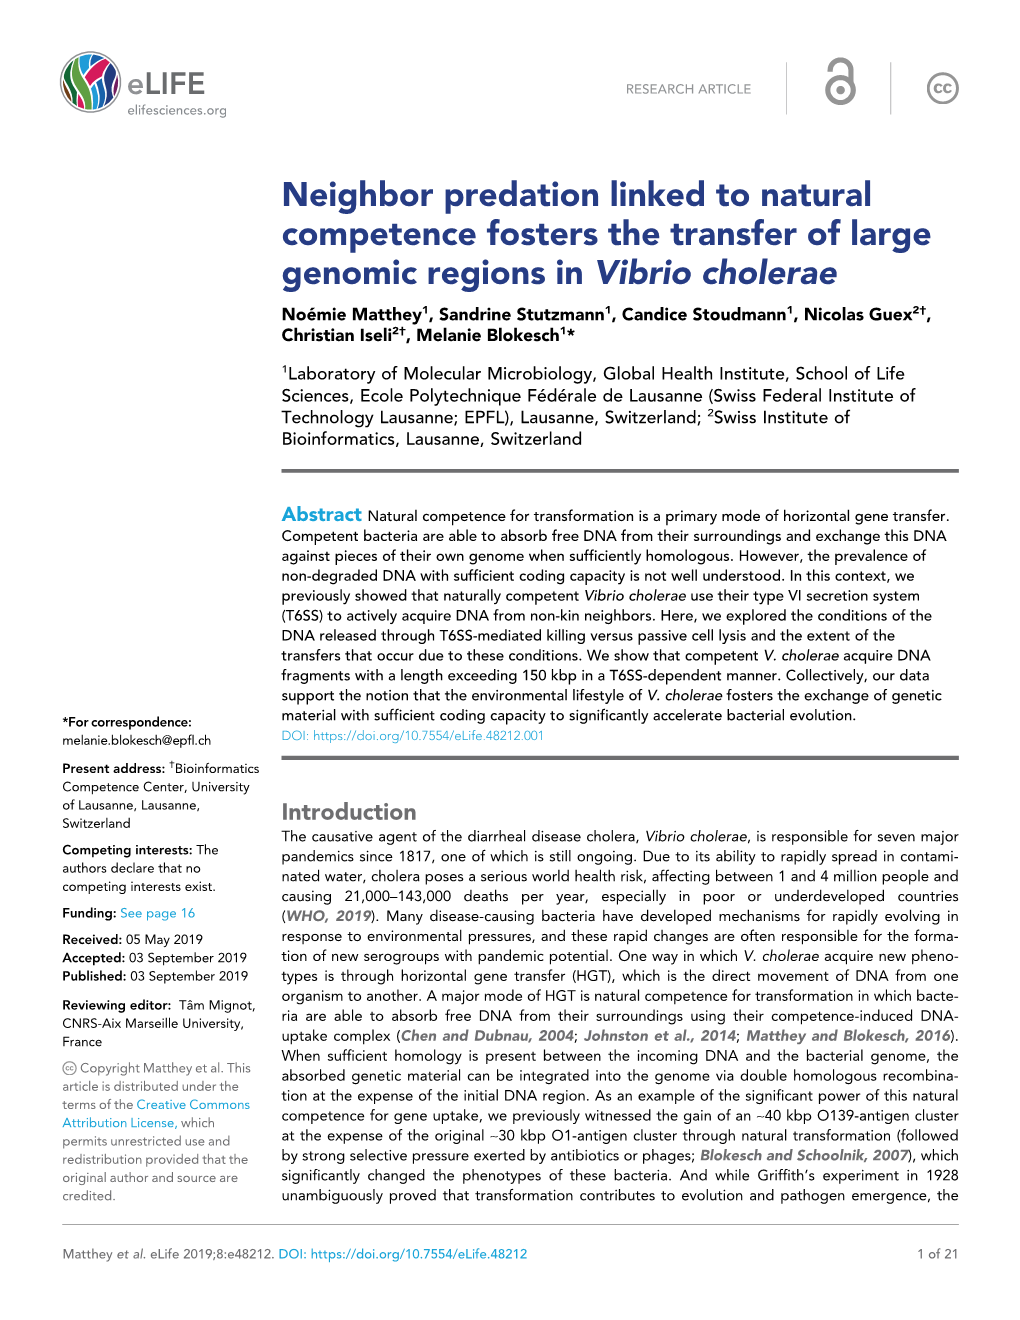 Neighbor Predation Linked to Natural Competence Fosters the Transfer Of